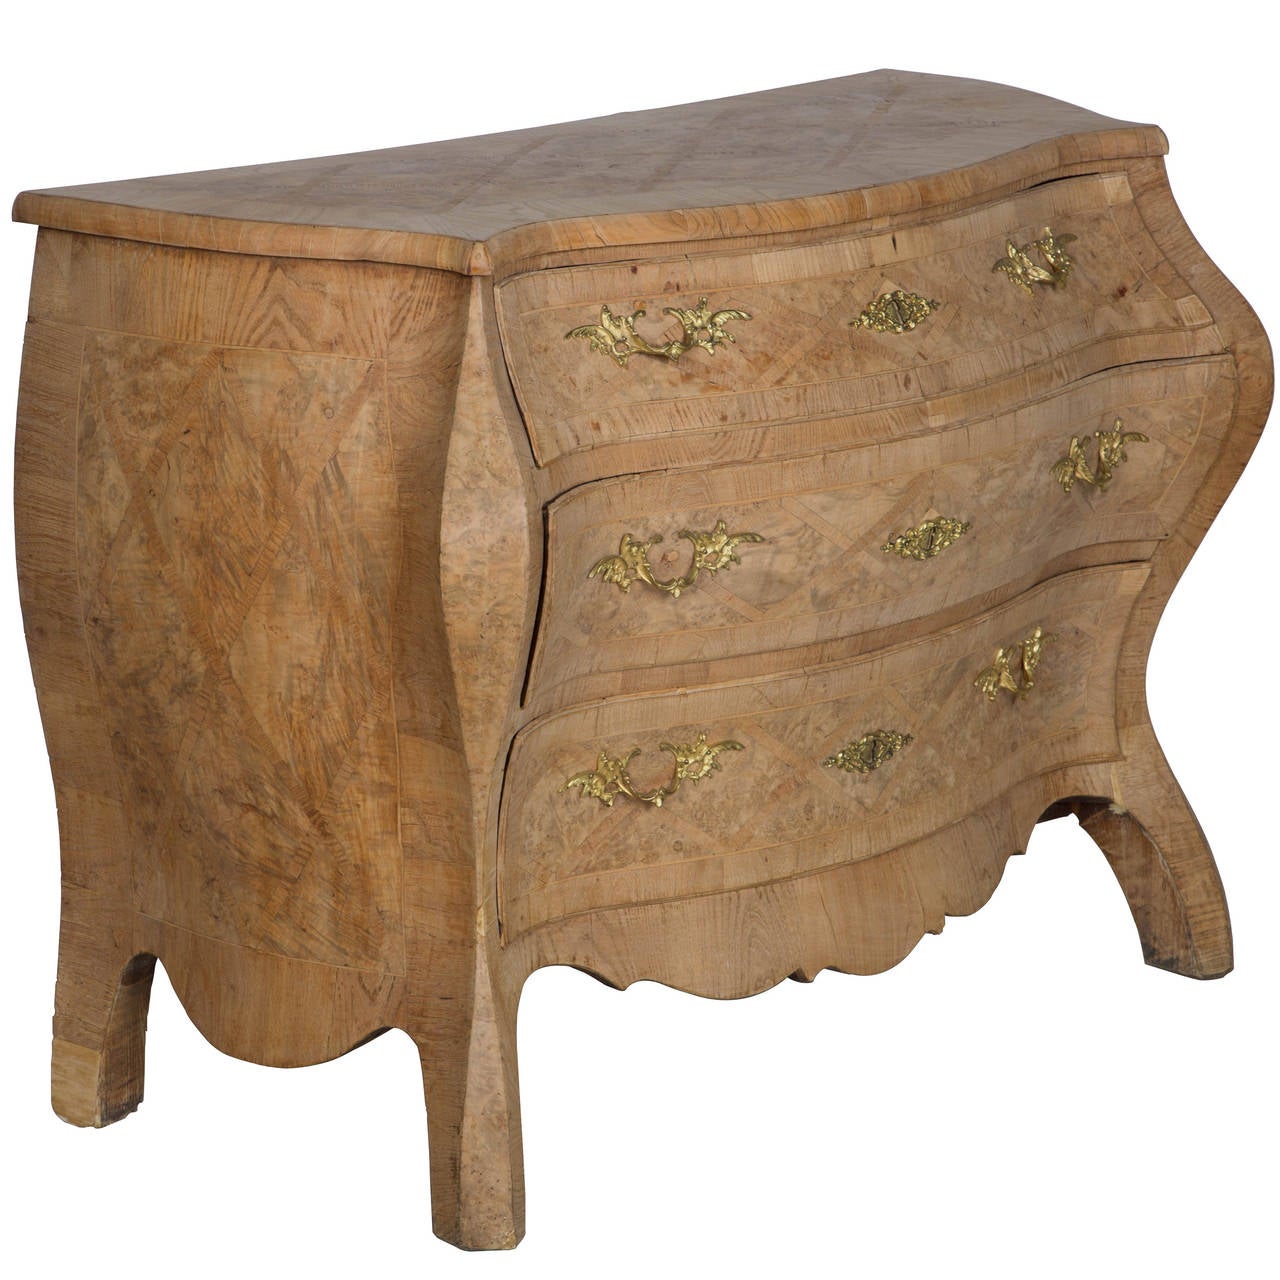 A fine Swedish Rococo period bombe commode with parquetry work in burr Elm and Elm, lovely small proportions and exaggerated form. Swedish c.1765.